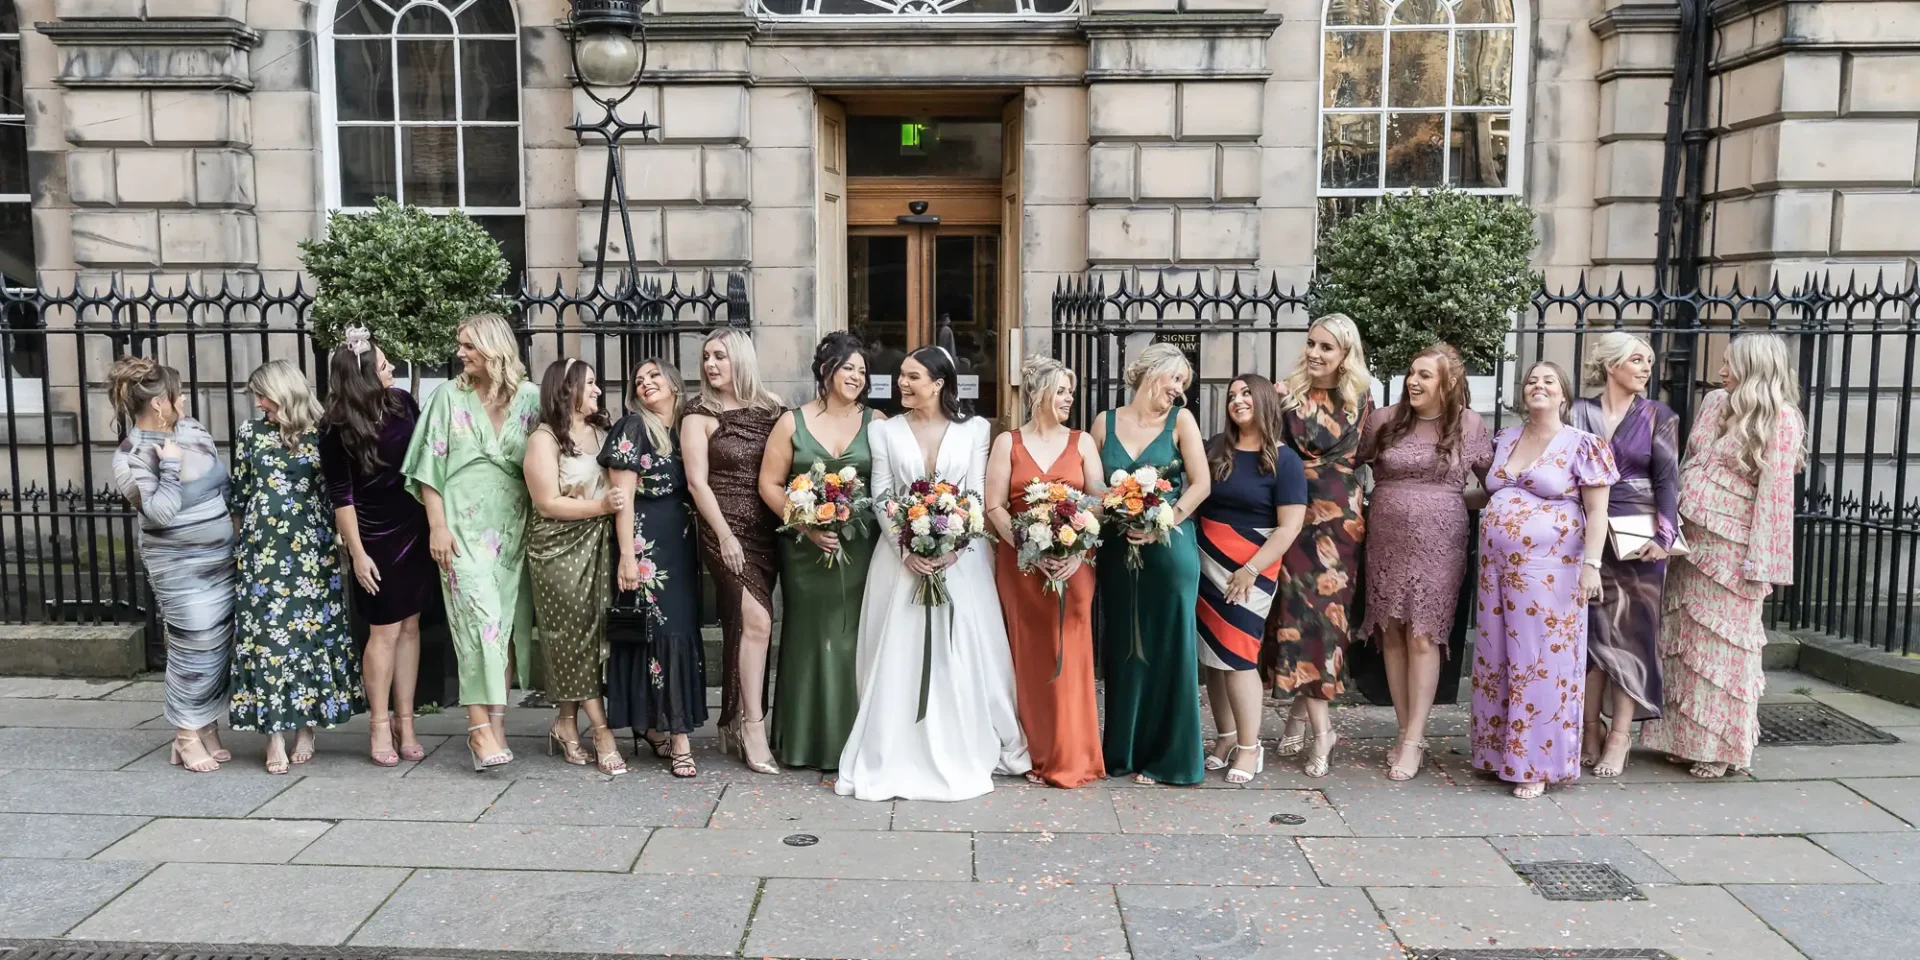 A bride in a white dress flanked by bridesmaids in colorful dresses and guests, holding bouquets, posing outside an elegant building.